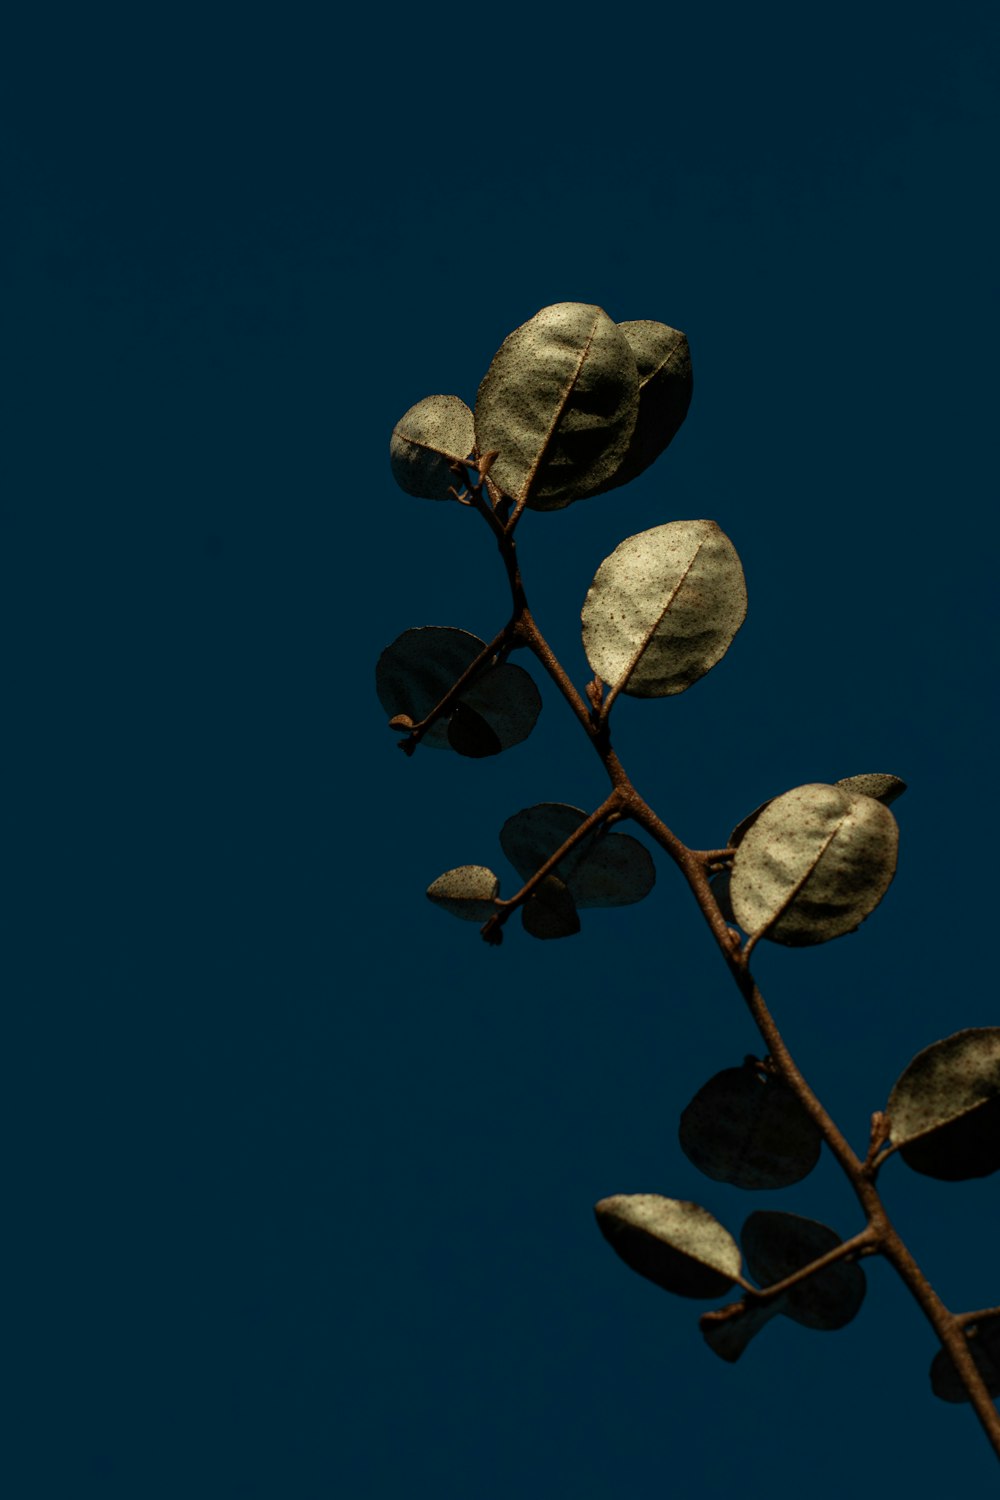 a branch with leaves against a dark blue sky